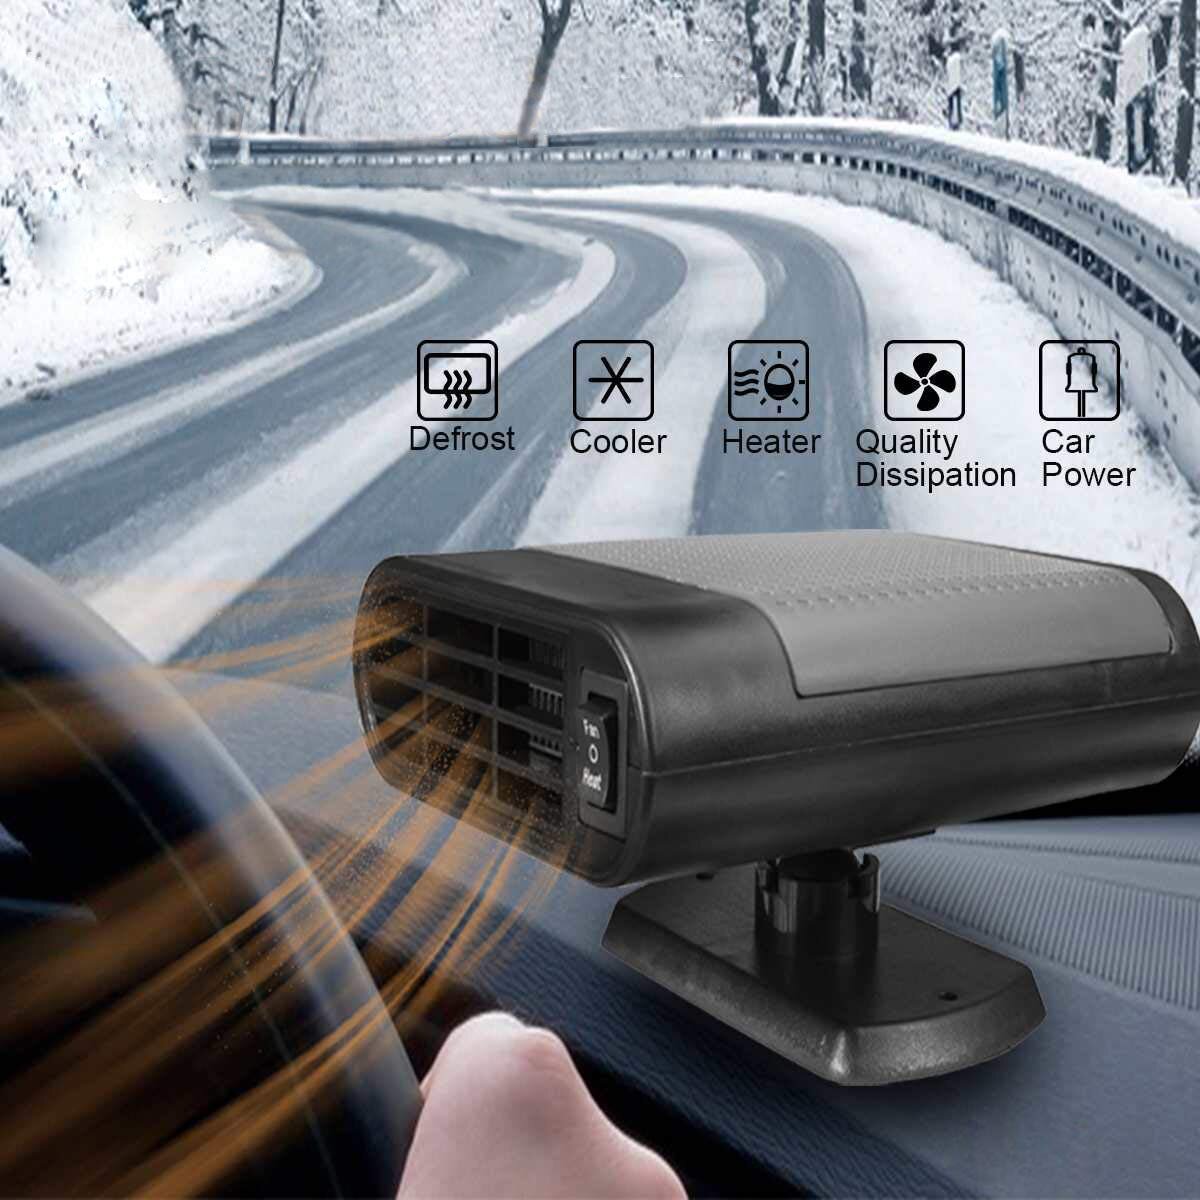 ONEVER Car Heater Air Cooler Fan Windscreen Demister Defroster 12V Electric Heating Portable Auto Dryer Heated